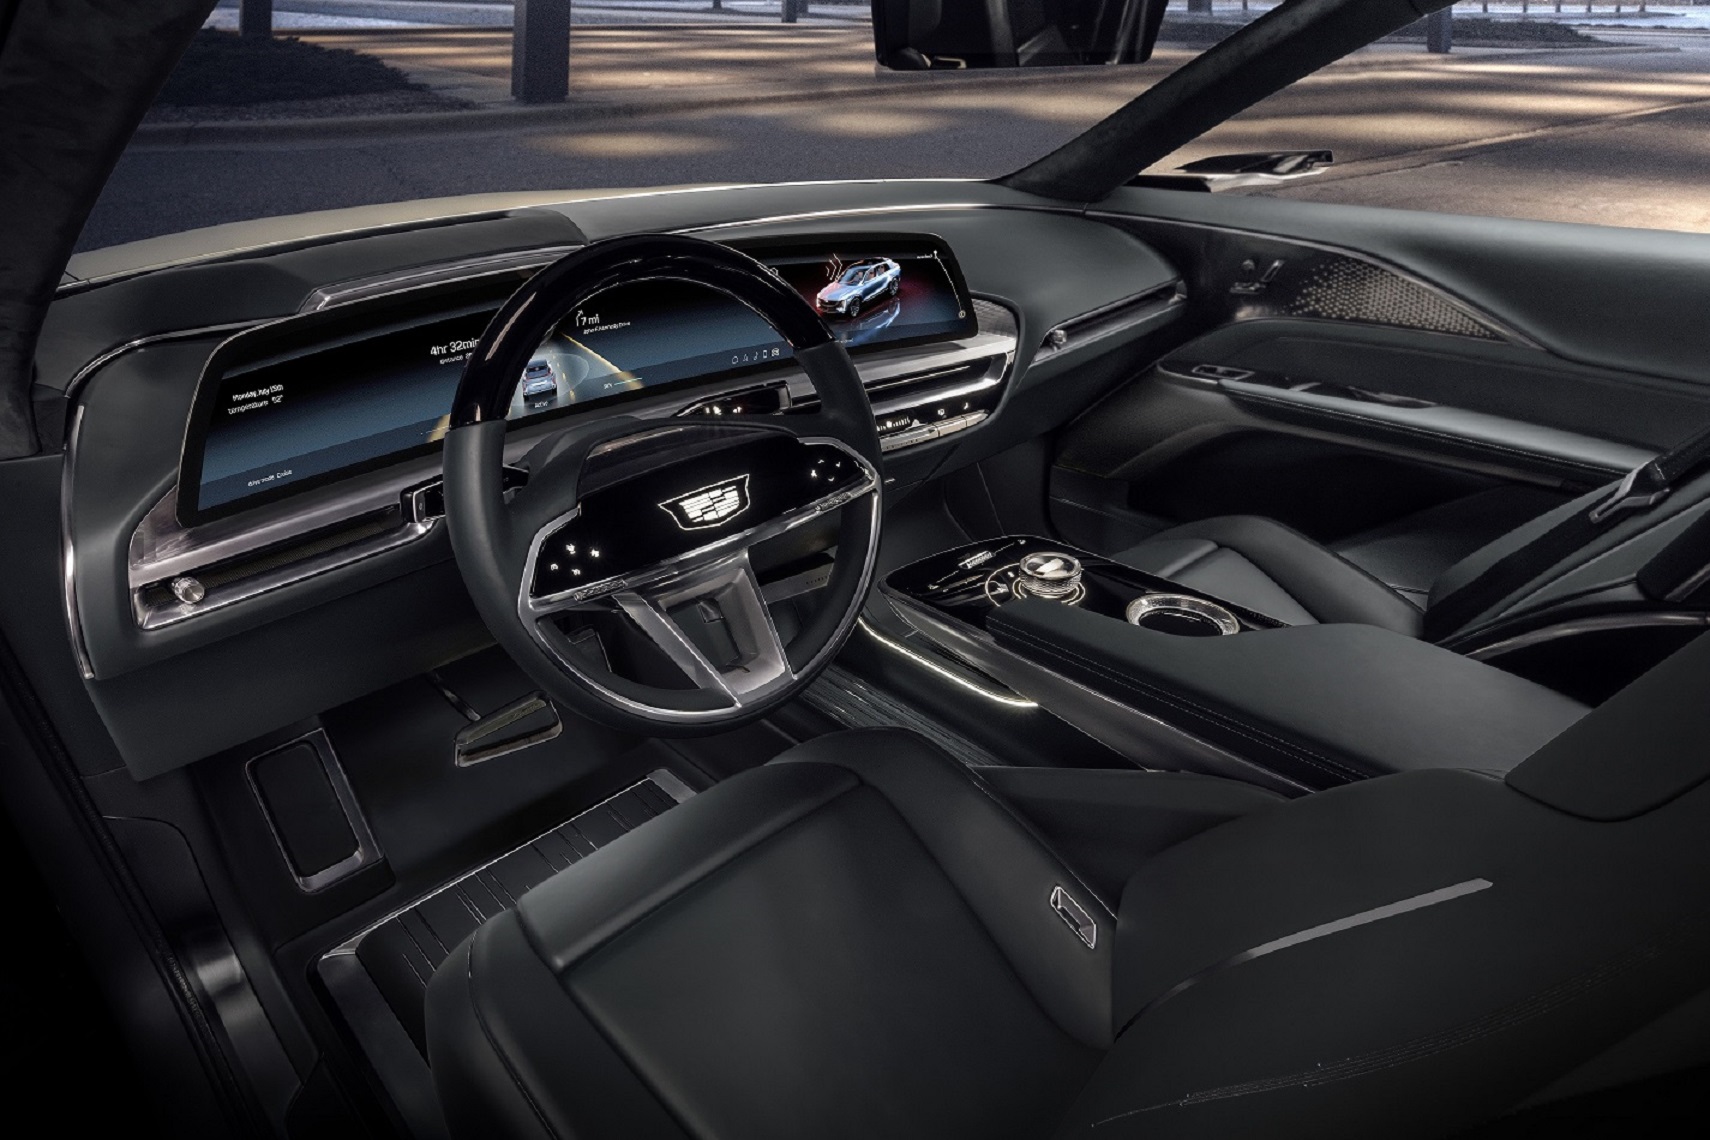 Cadillac Looks Outside Automotive Industry to Deliver Next-Generation User Experience